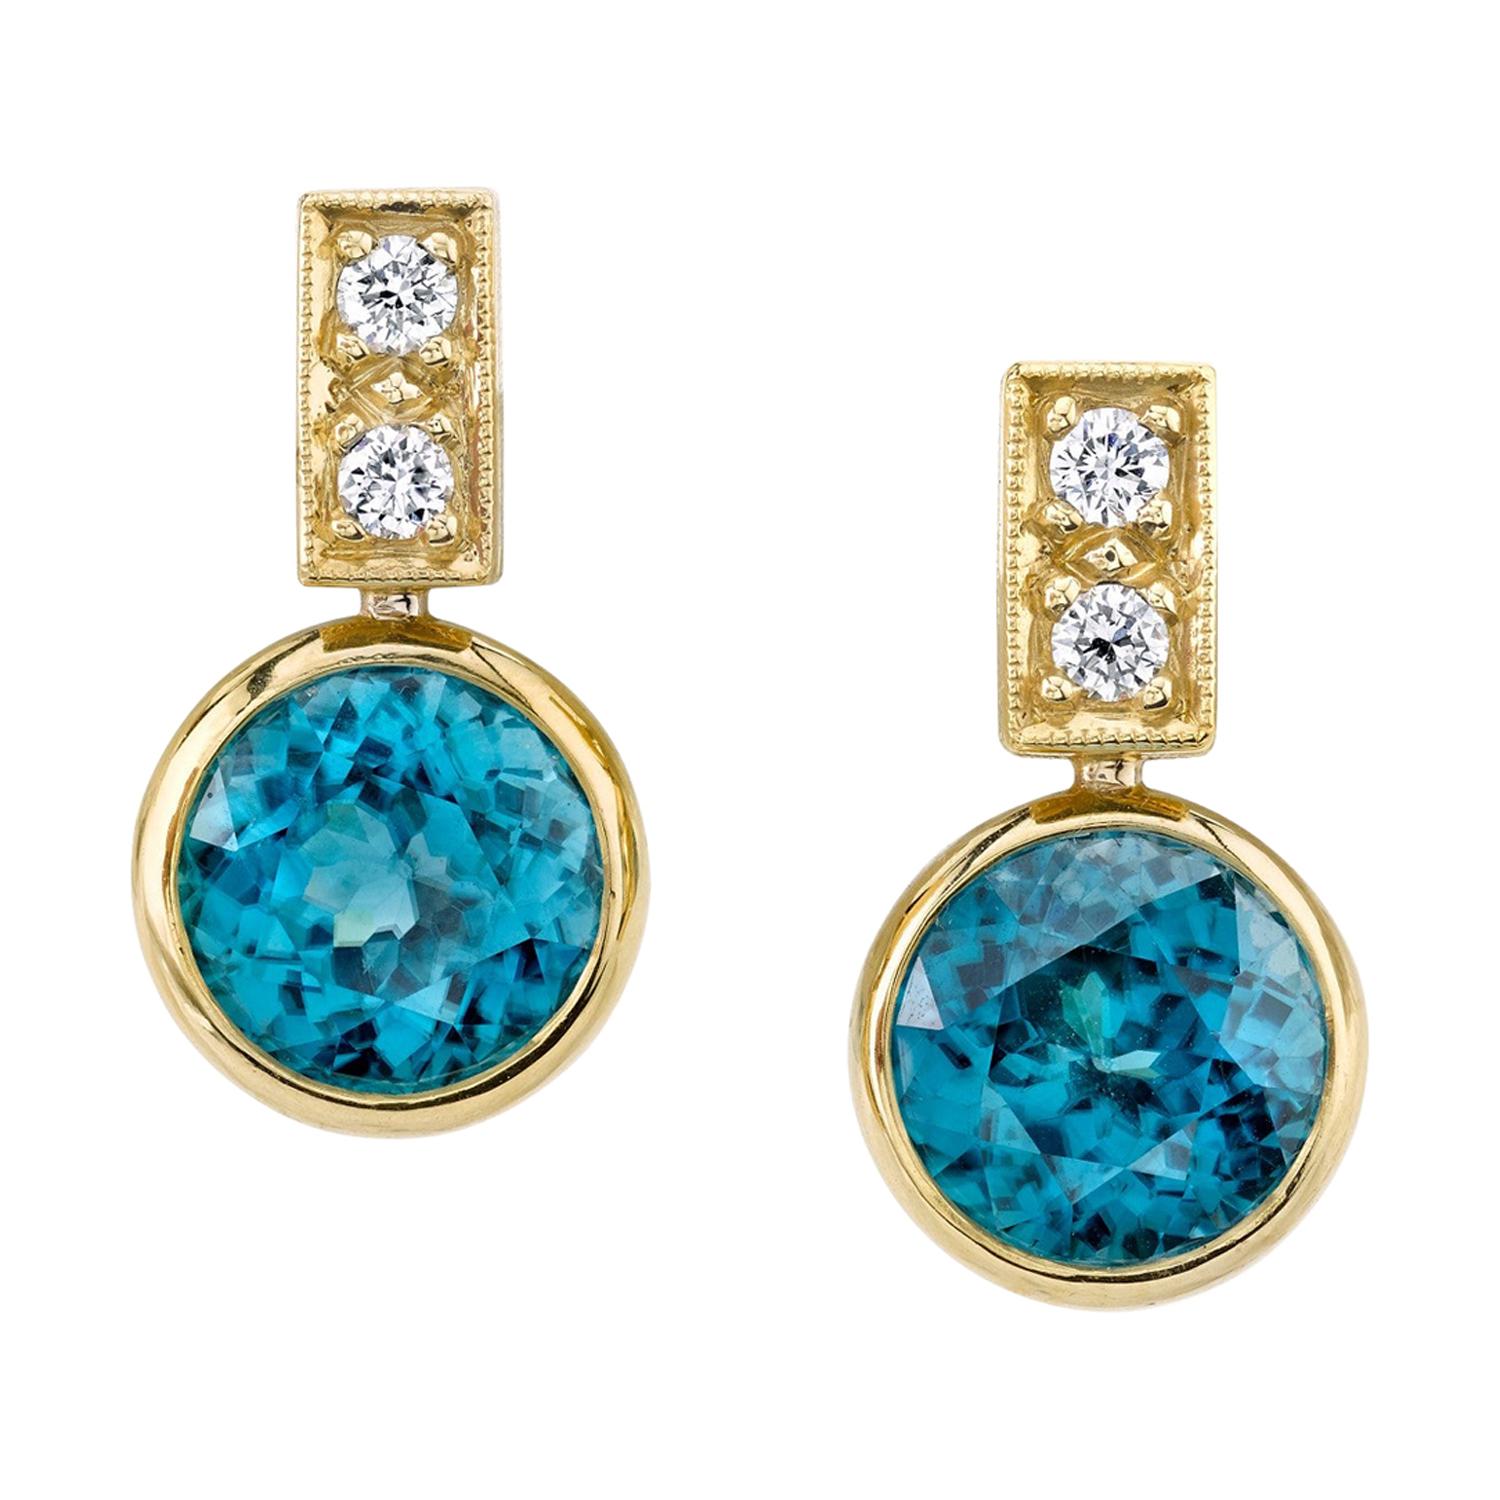 Blue Zircon and Diamond Drop Earrings in 18K Yellow Gold, 9.64 Carats Total For Sale